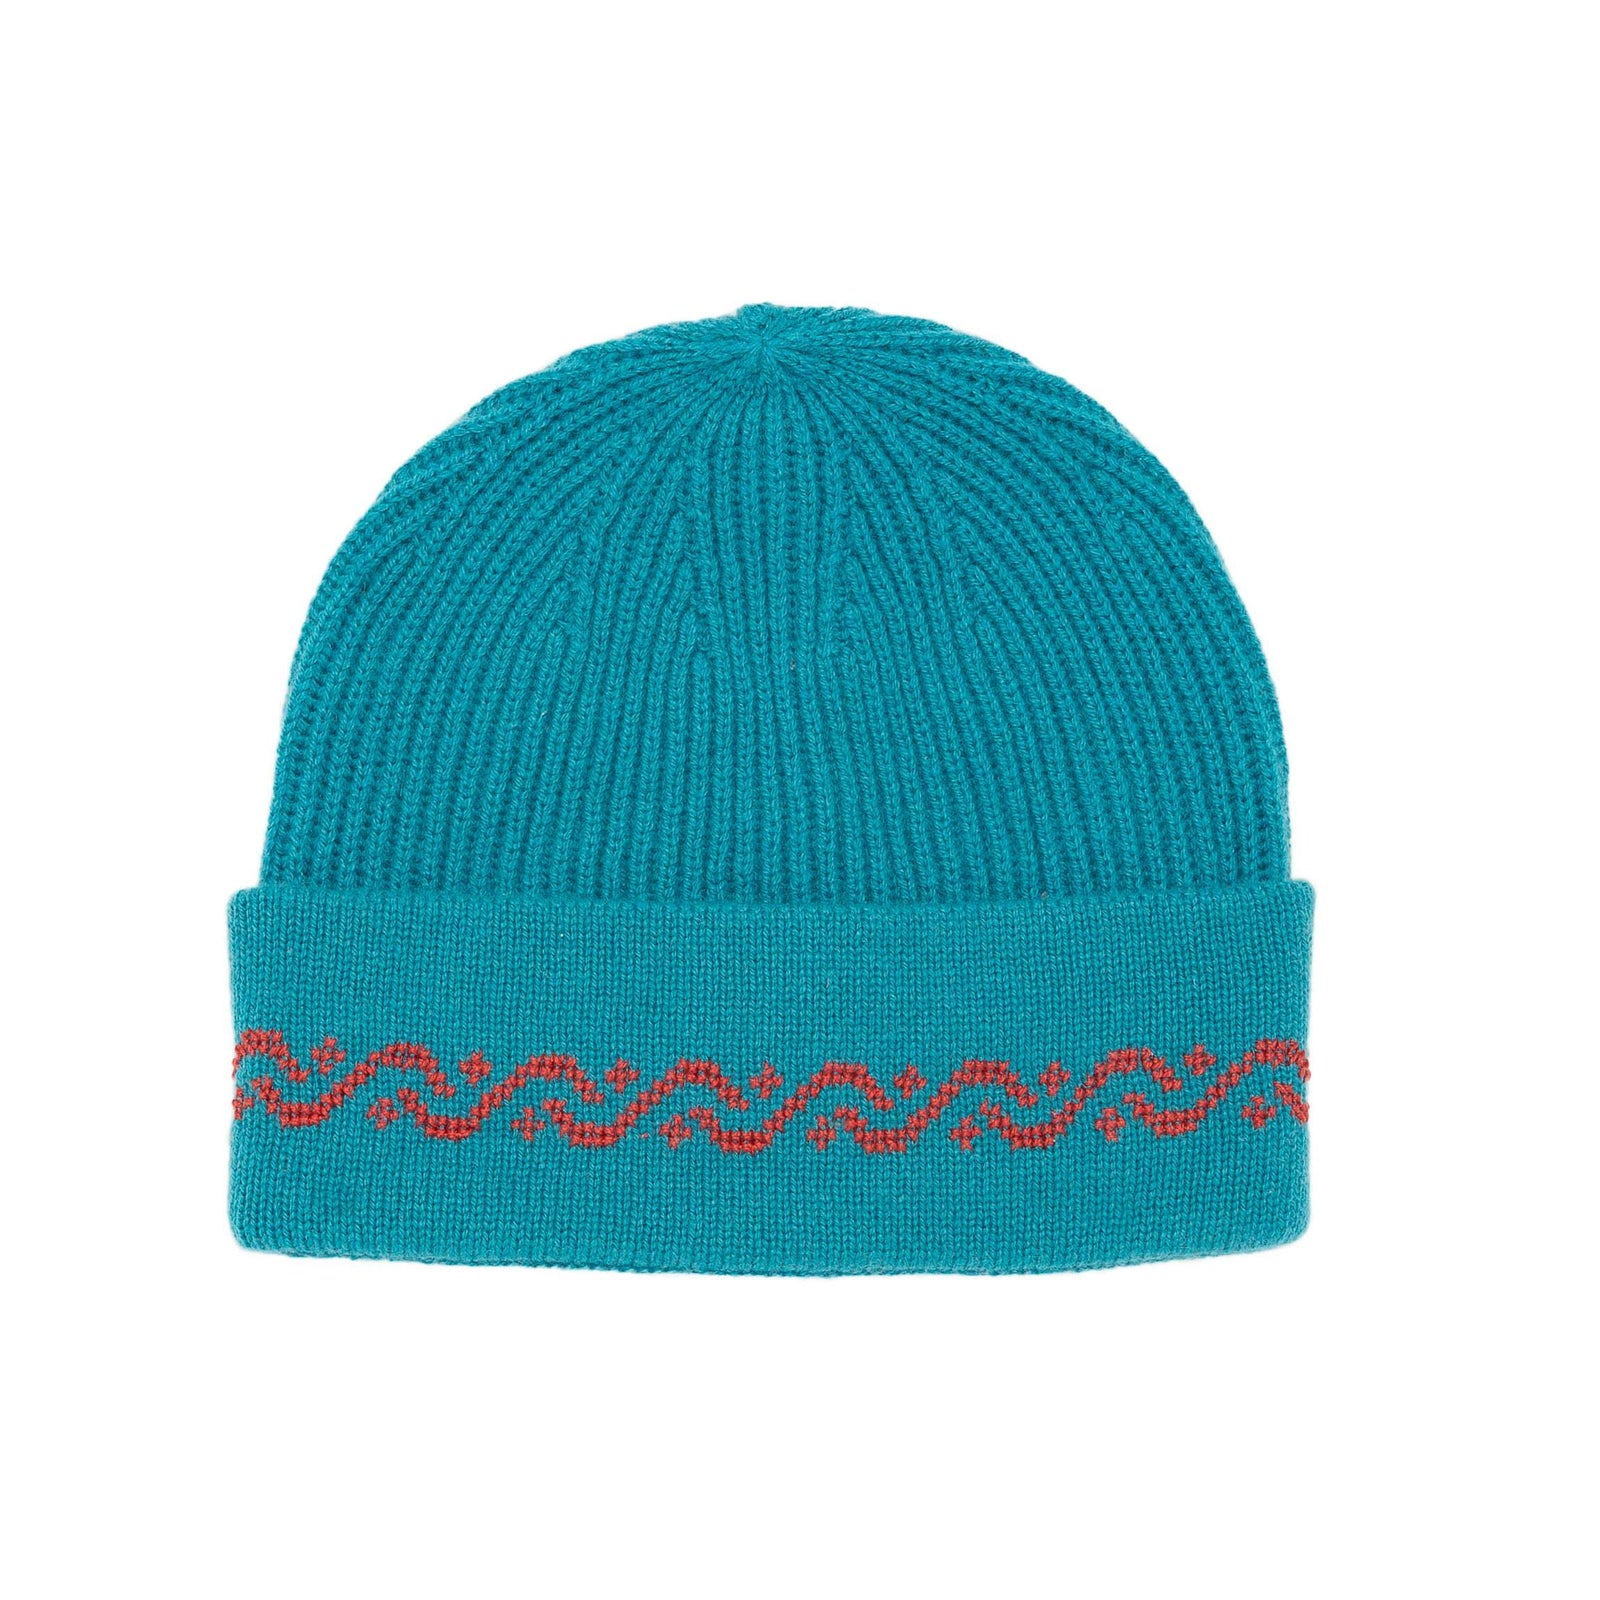 TEAL CASHMERE BEANIE | WAVES